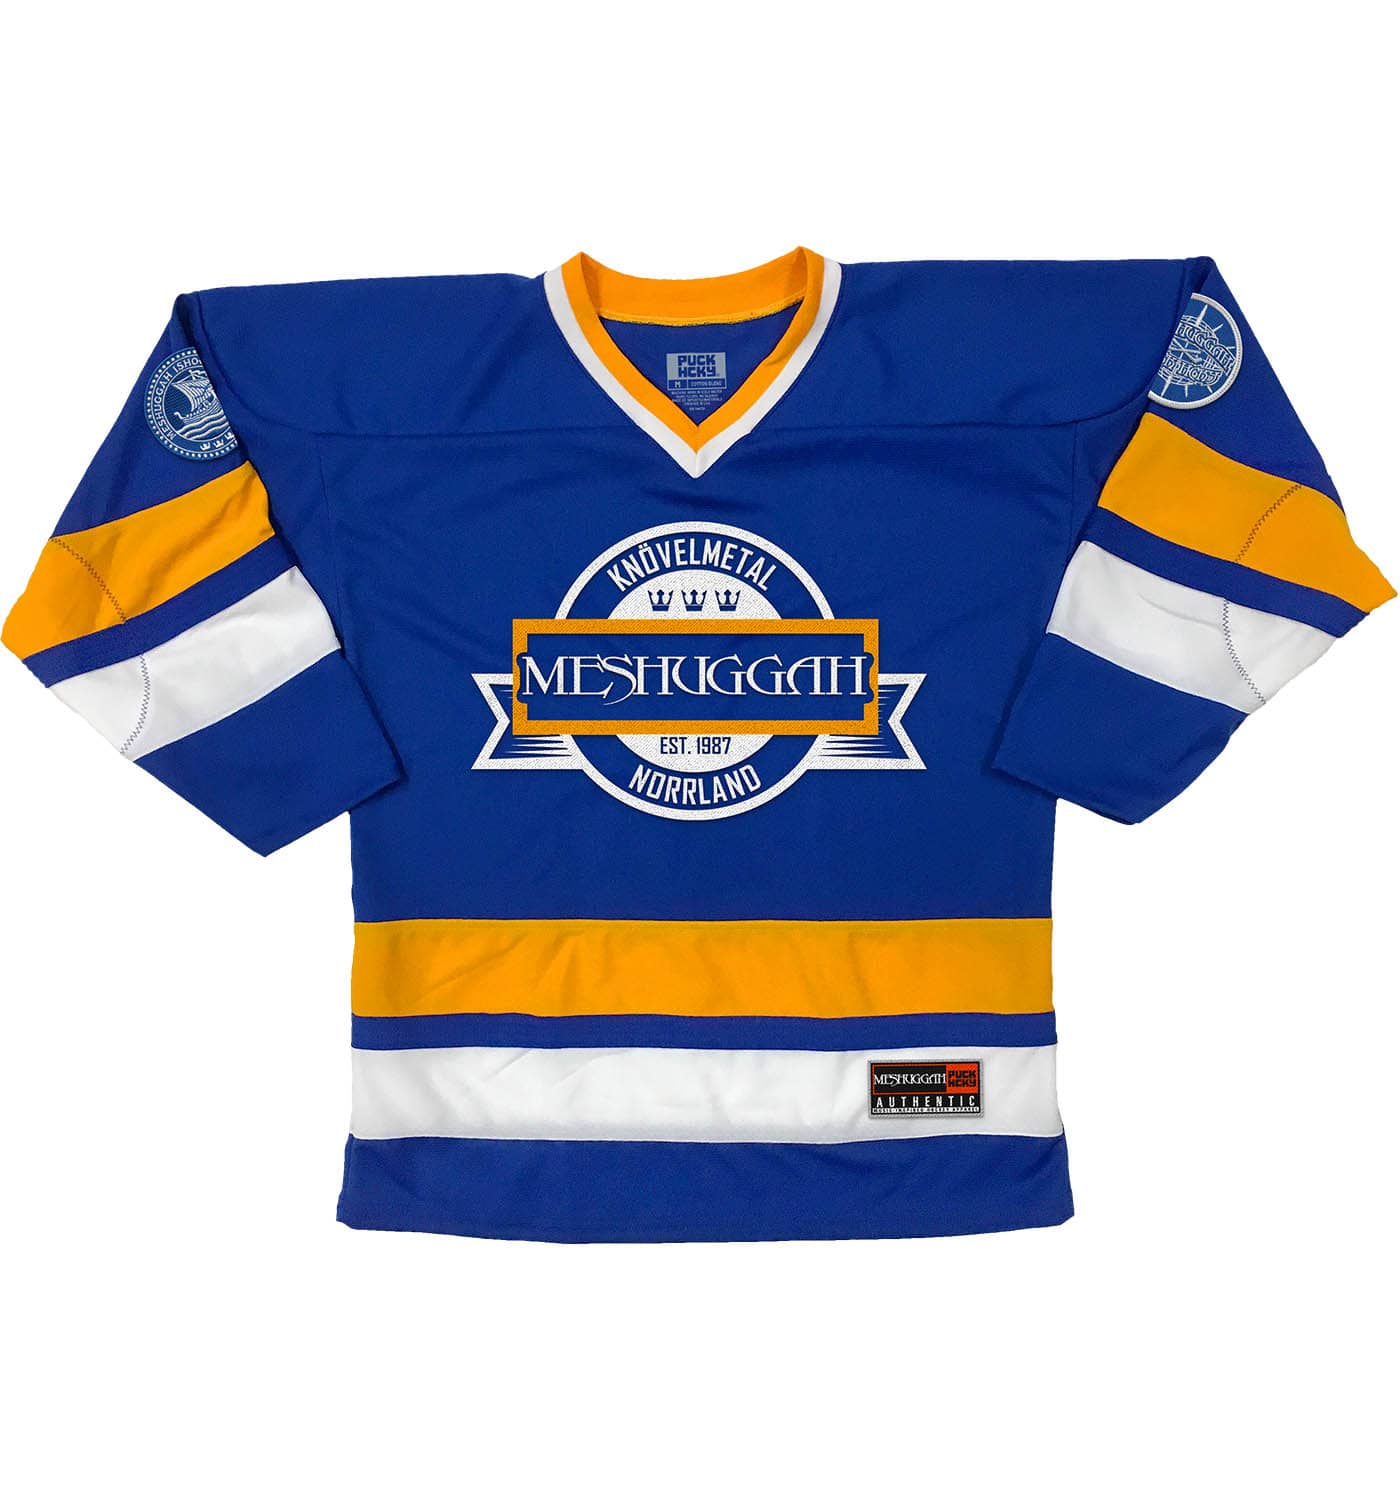 white flyers jersey